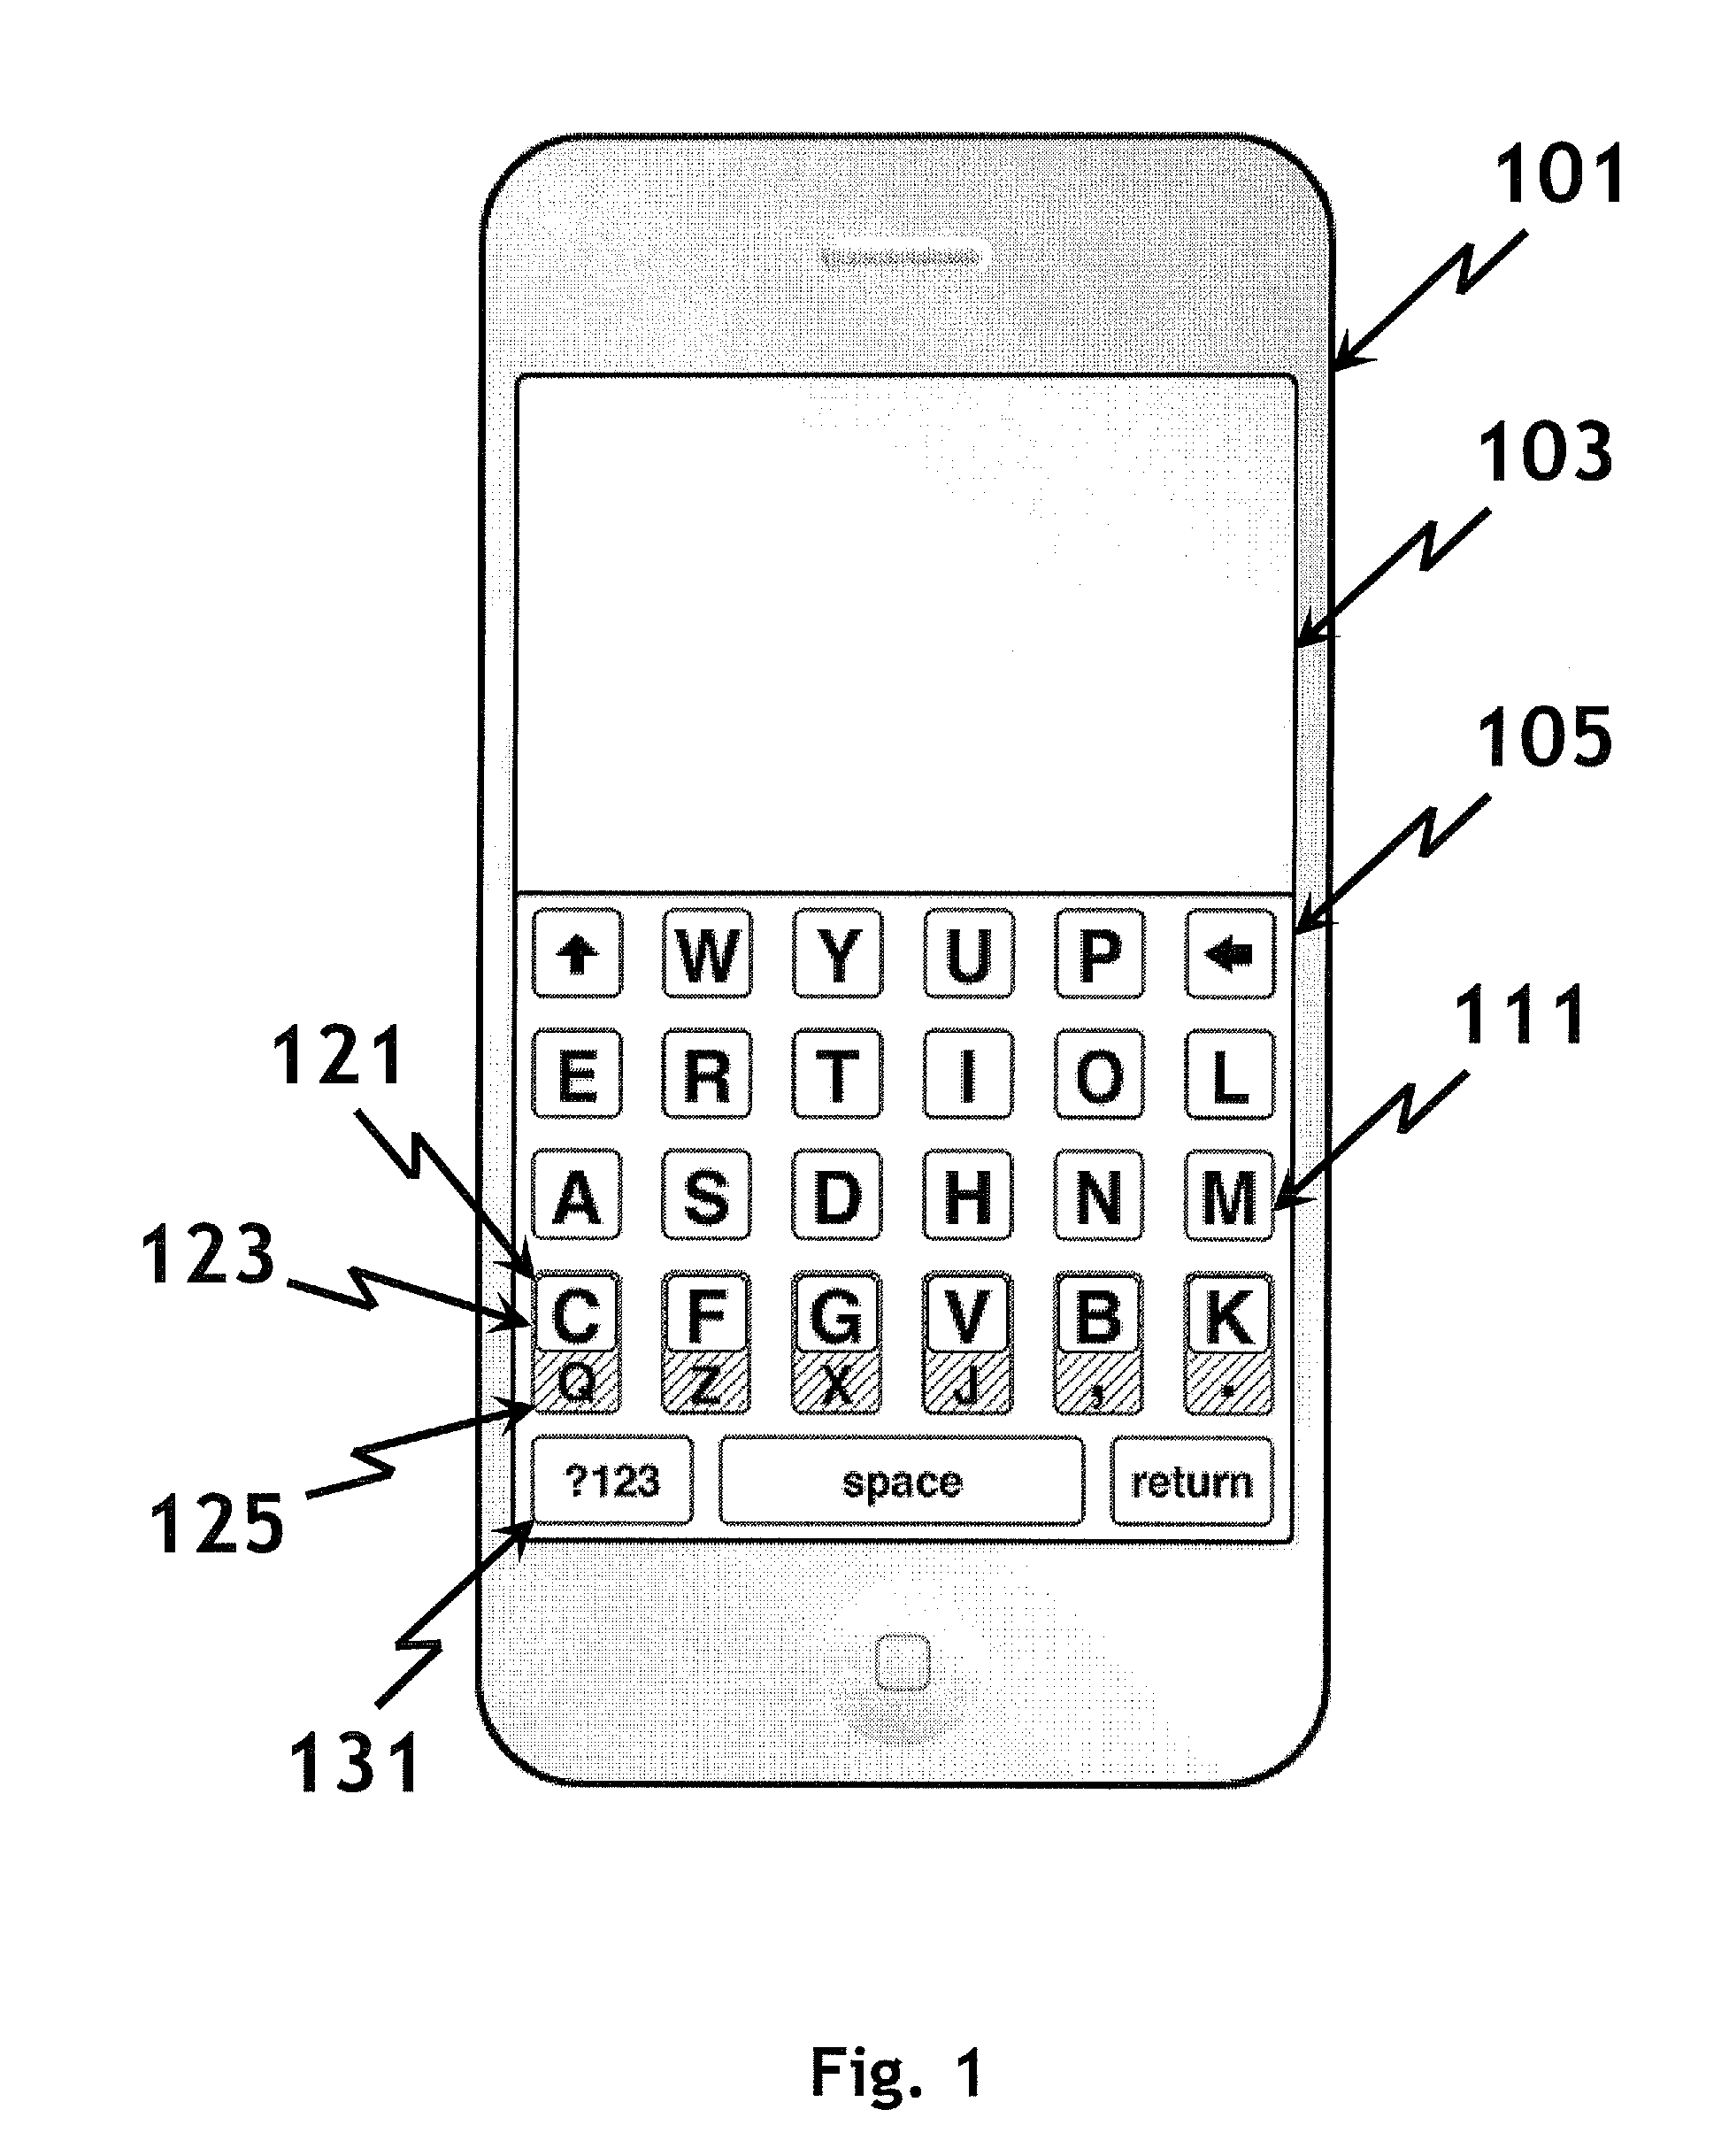 Alphanumeric keypad for touch-screen devices